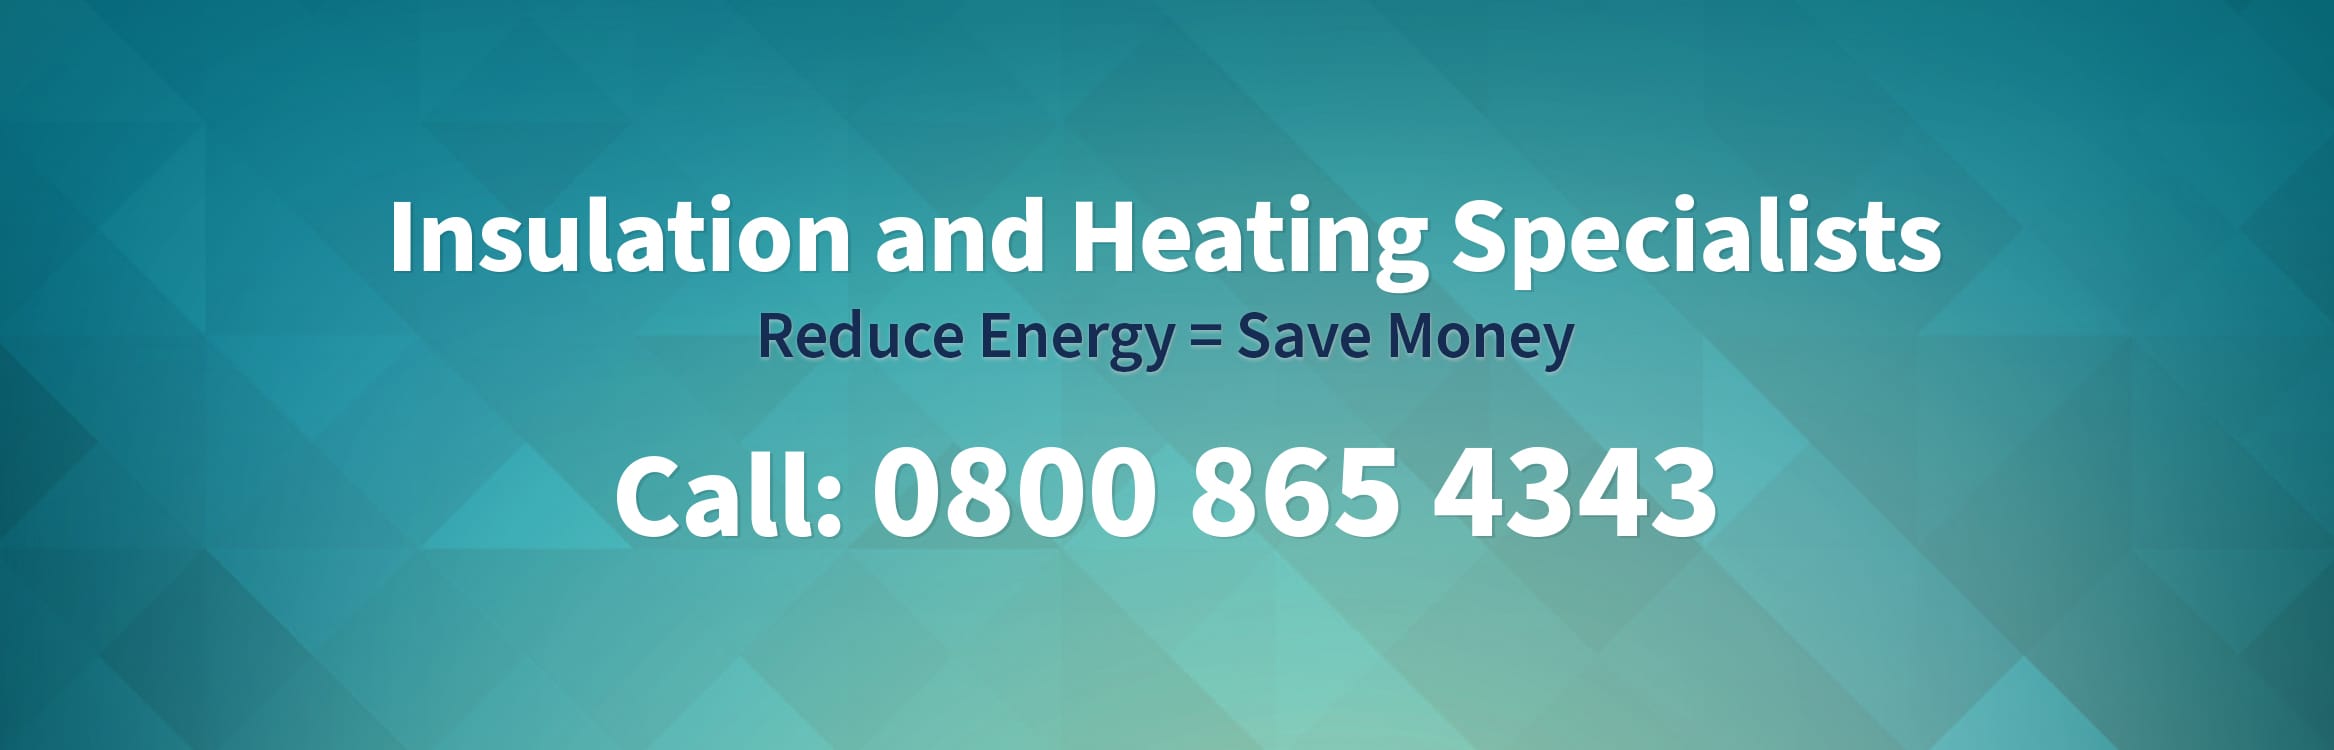 Insulation and Heating Specialists. Reduce Energy = Save Money. Call: 08008654343